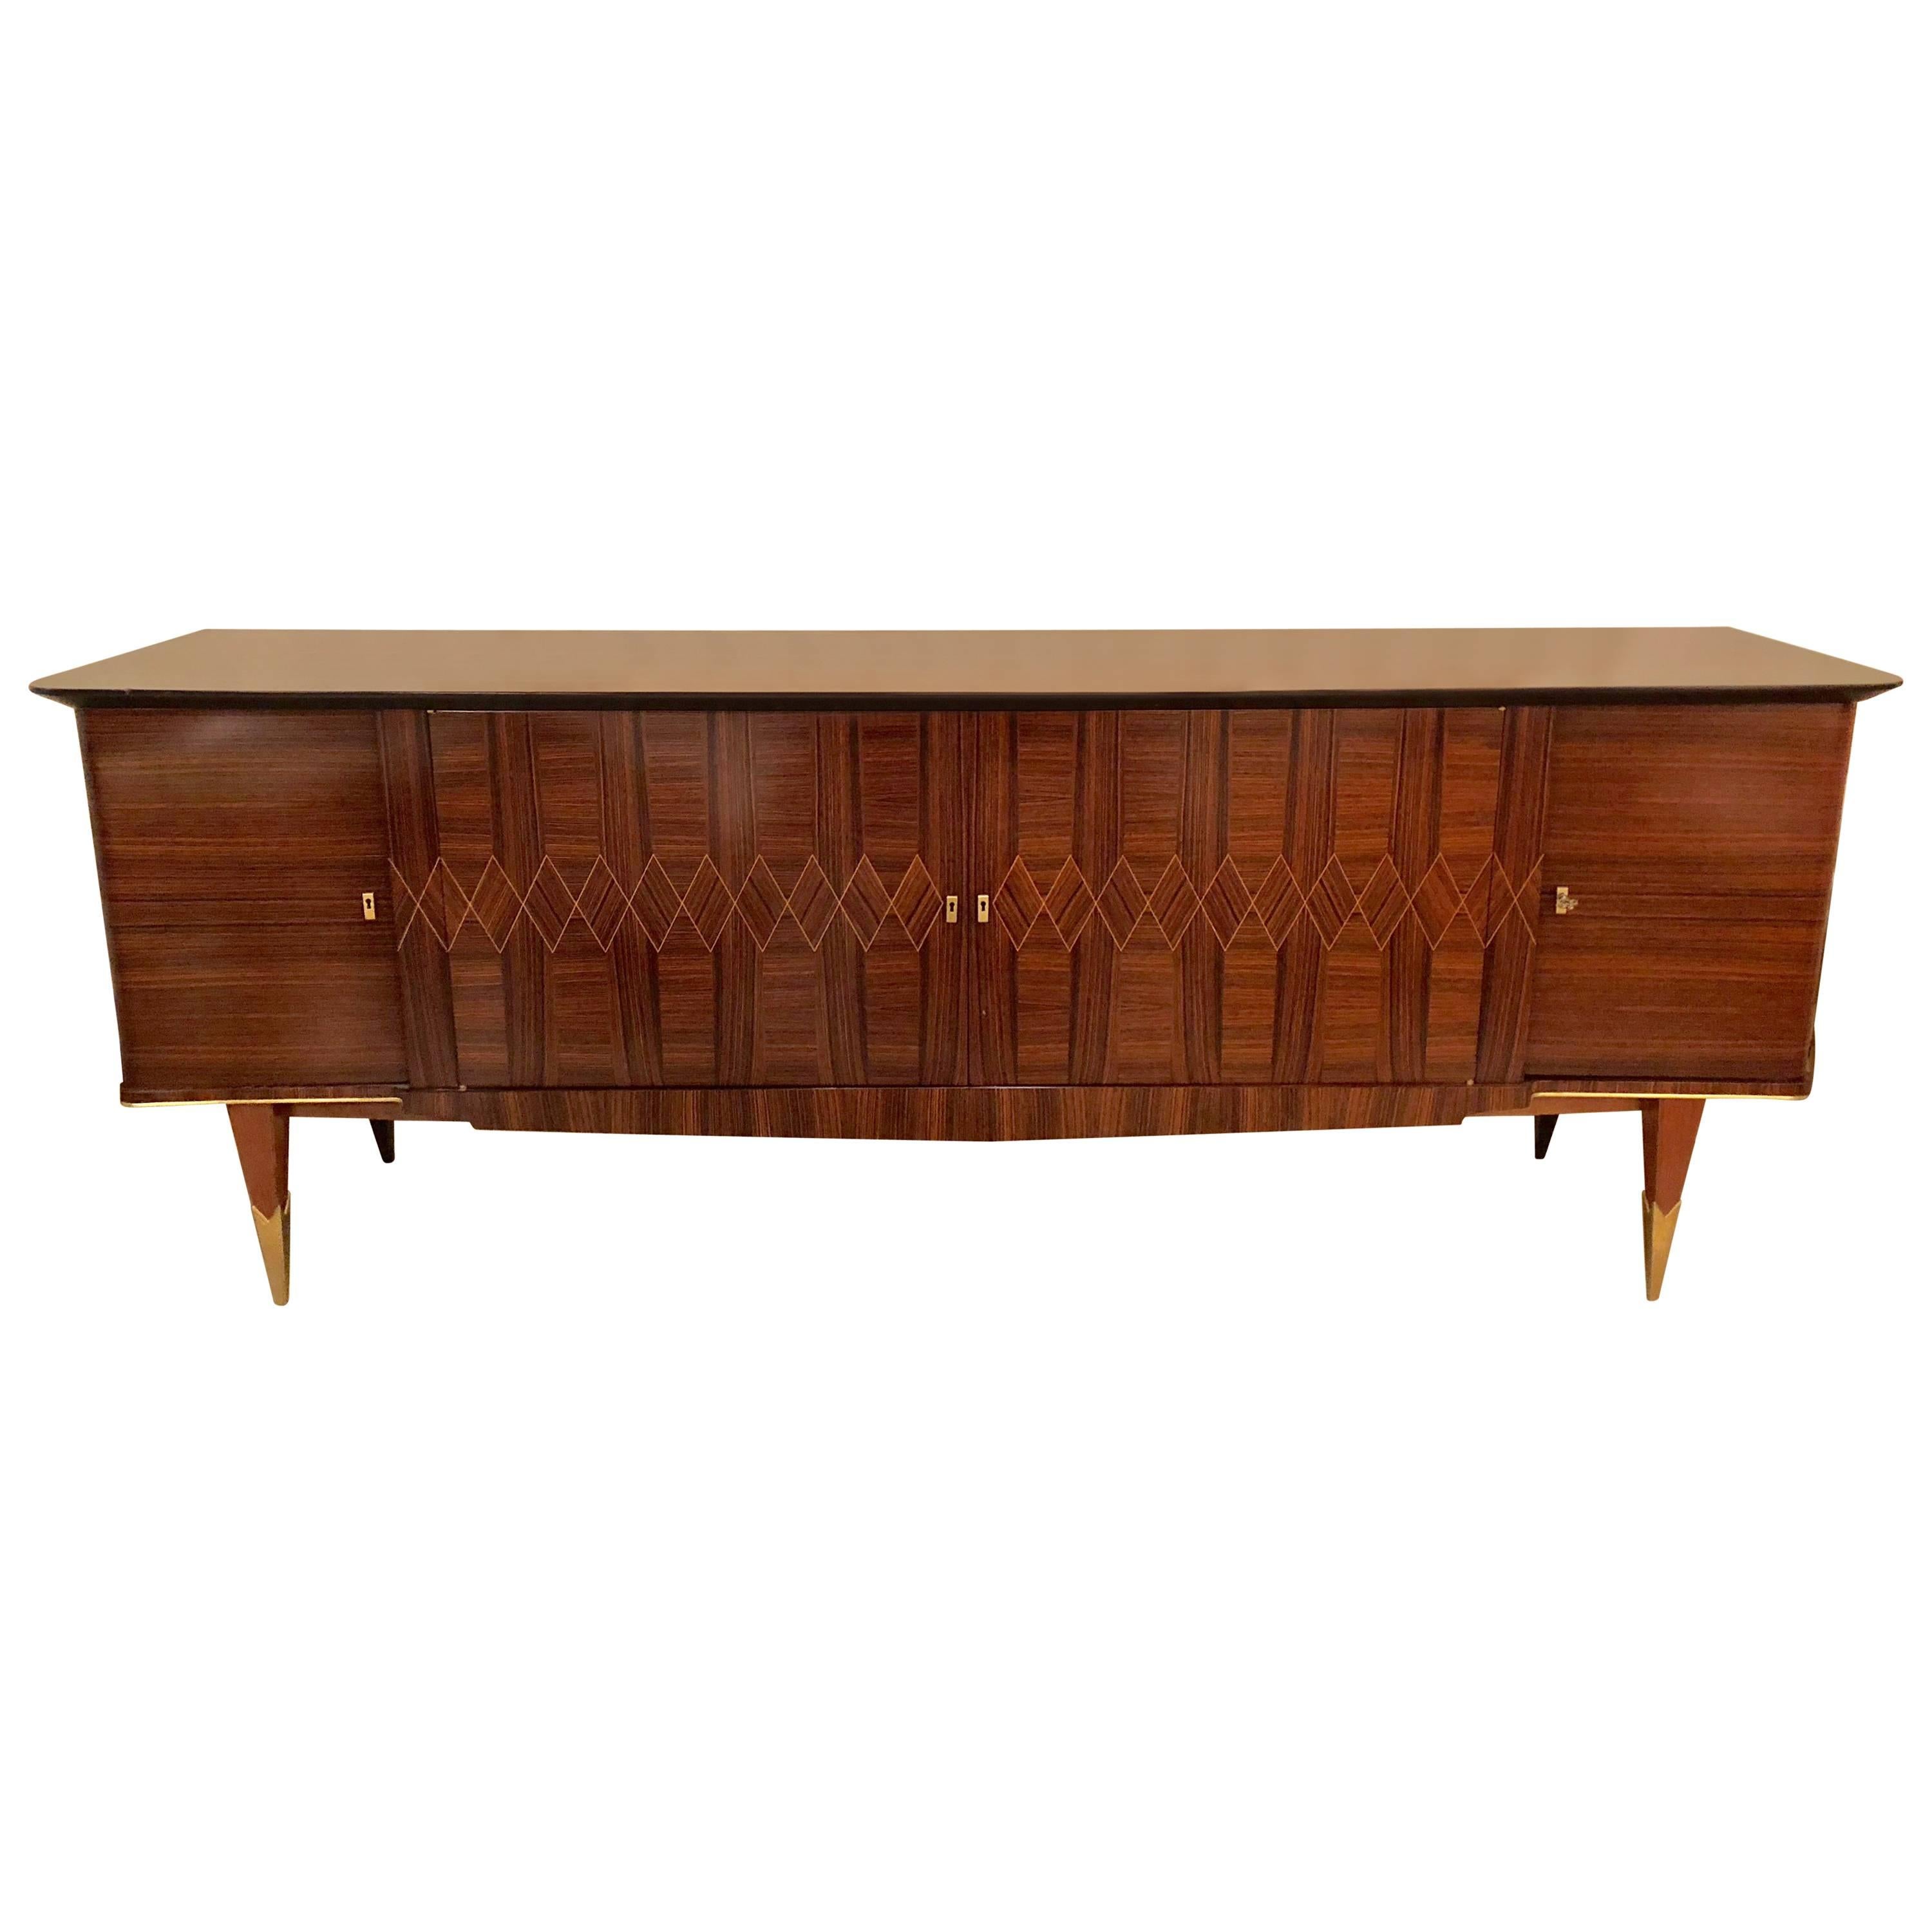 Monumental Art Deco Macassar and Inlaid Sideboard Credenza with Glass Shelves